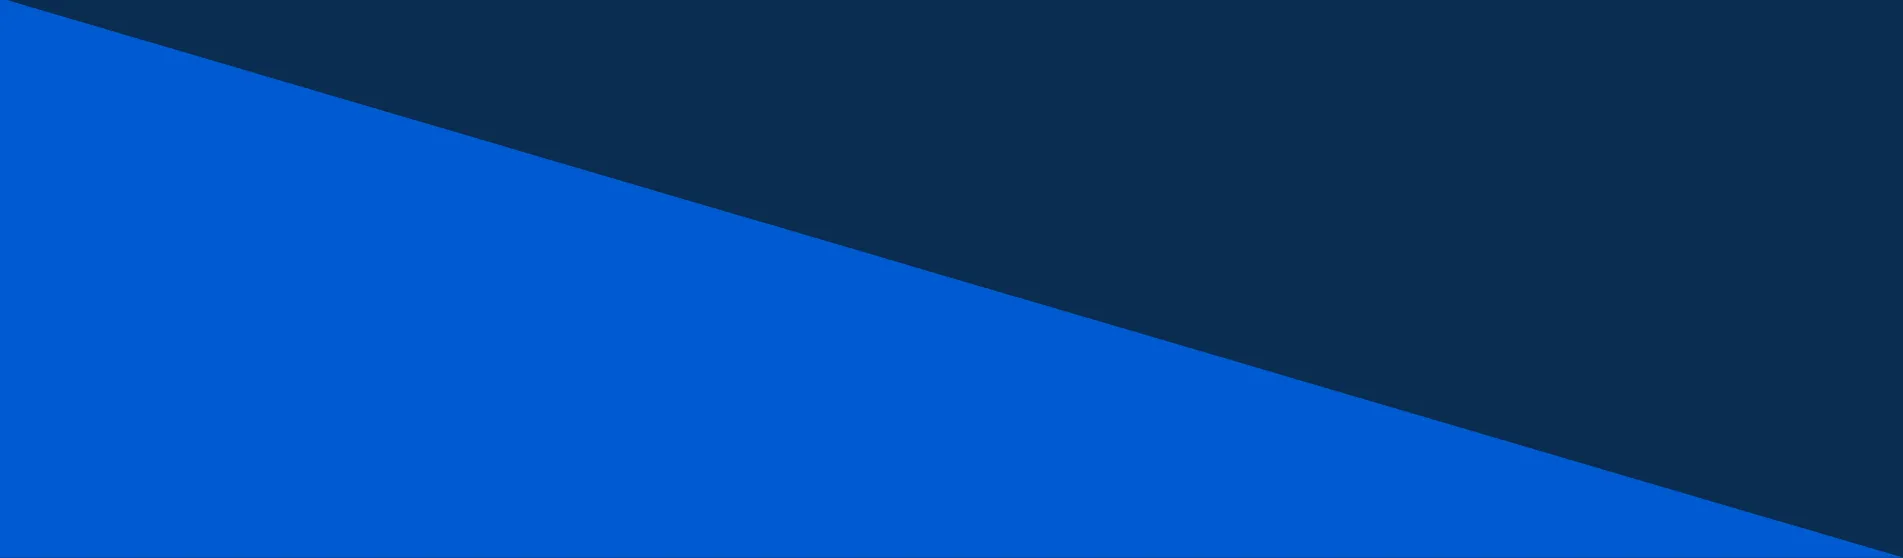 sea blue and midnight blue divided 2 1903x558